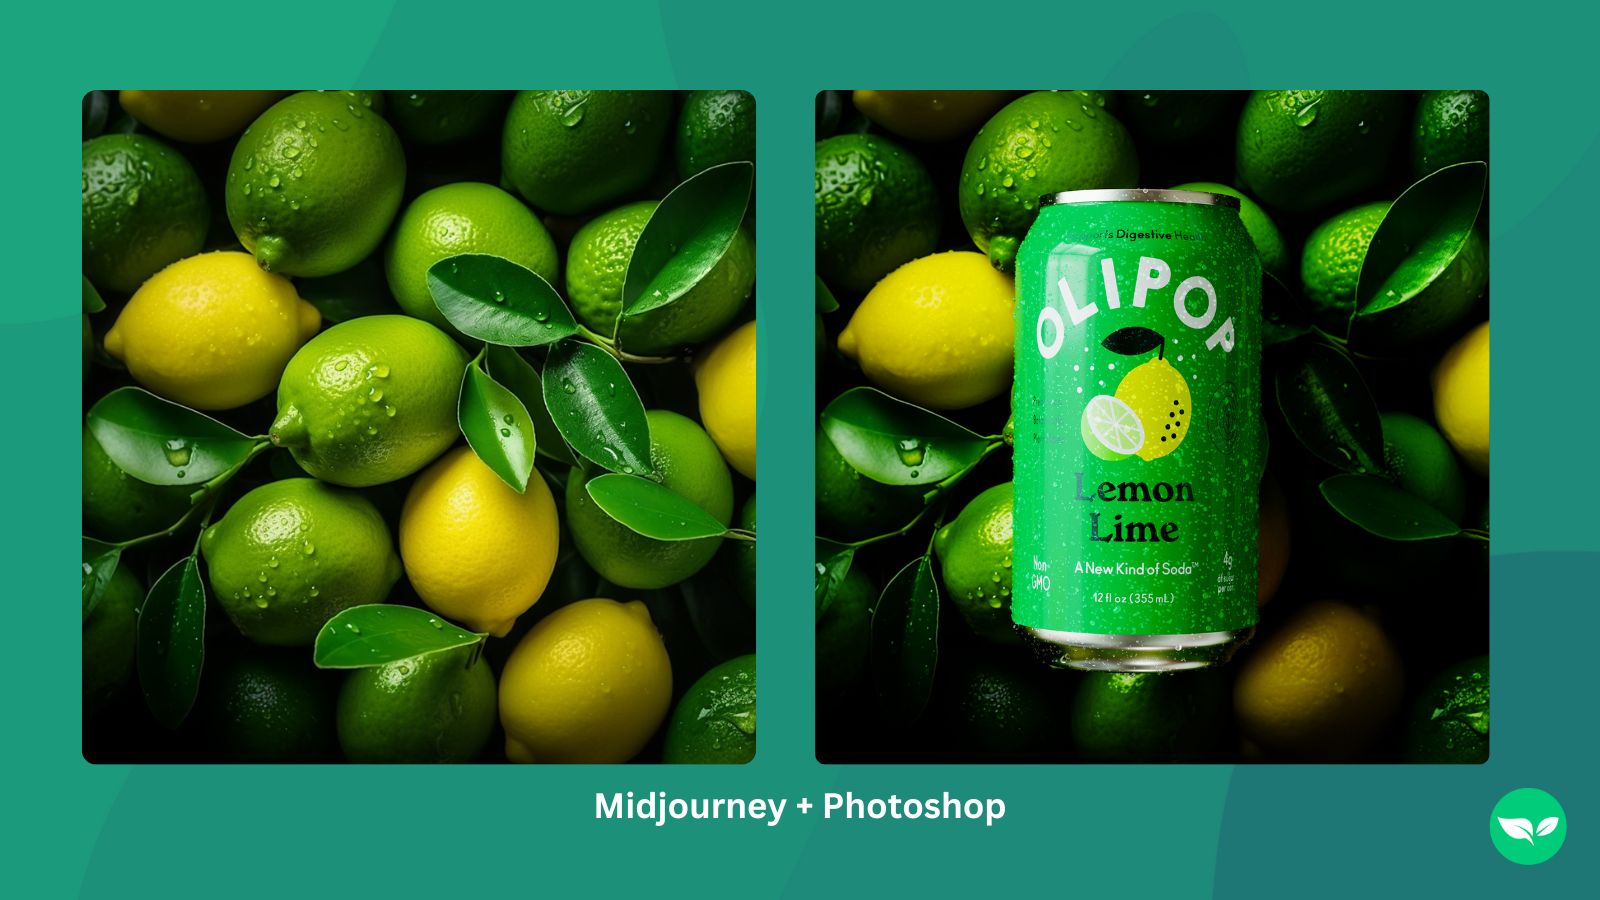 Infographic showing how Midjourney and Photoshop can be used to create product photos for ecommerce.